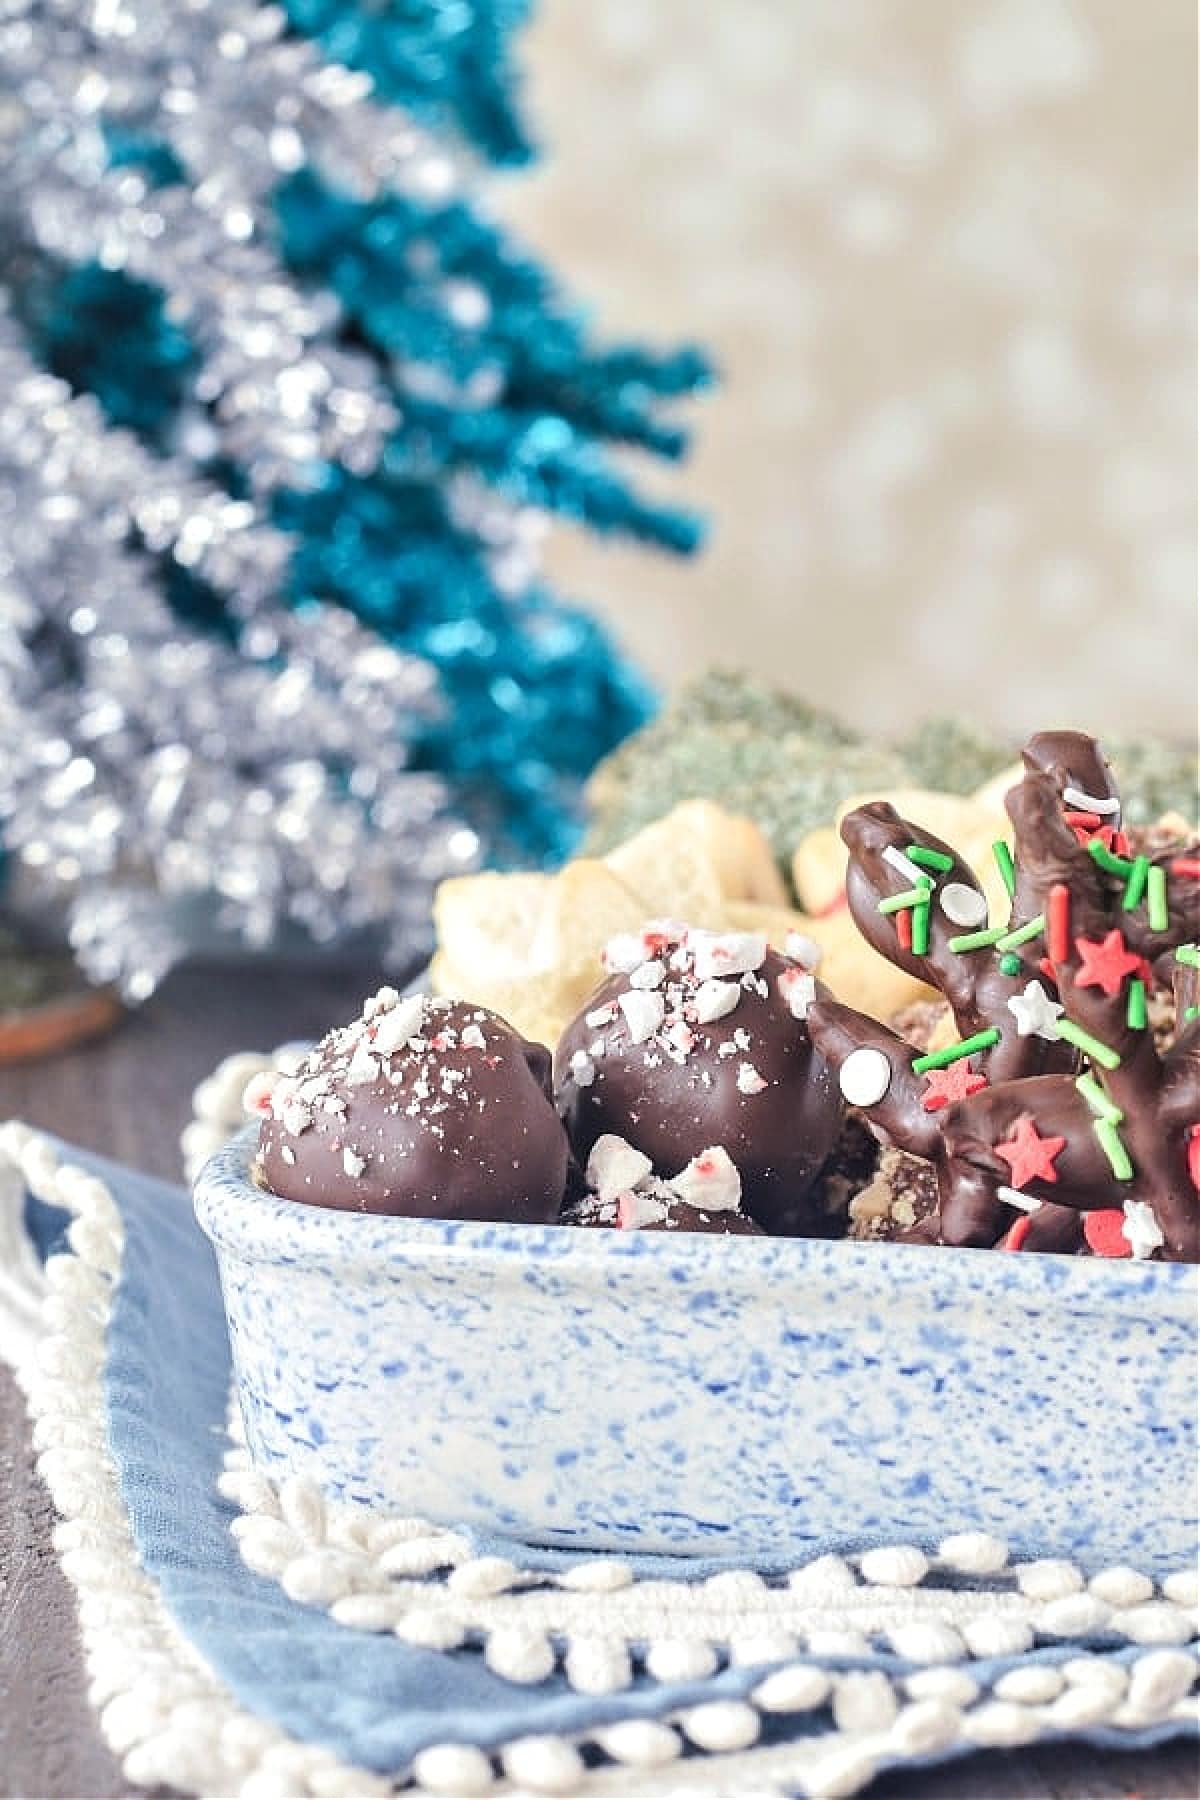 A blue and white dish of holiday treats, including chocolate coated truffles with candy cane pieces, pretzel reindeer, shortbread cookies. A silver and teal foil Christmas tree sits in background.